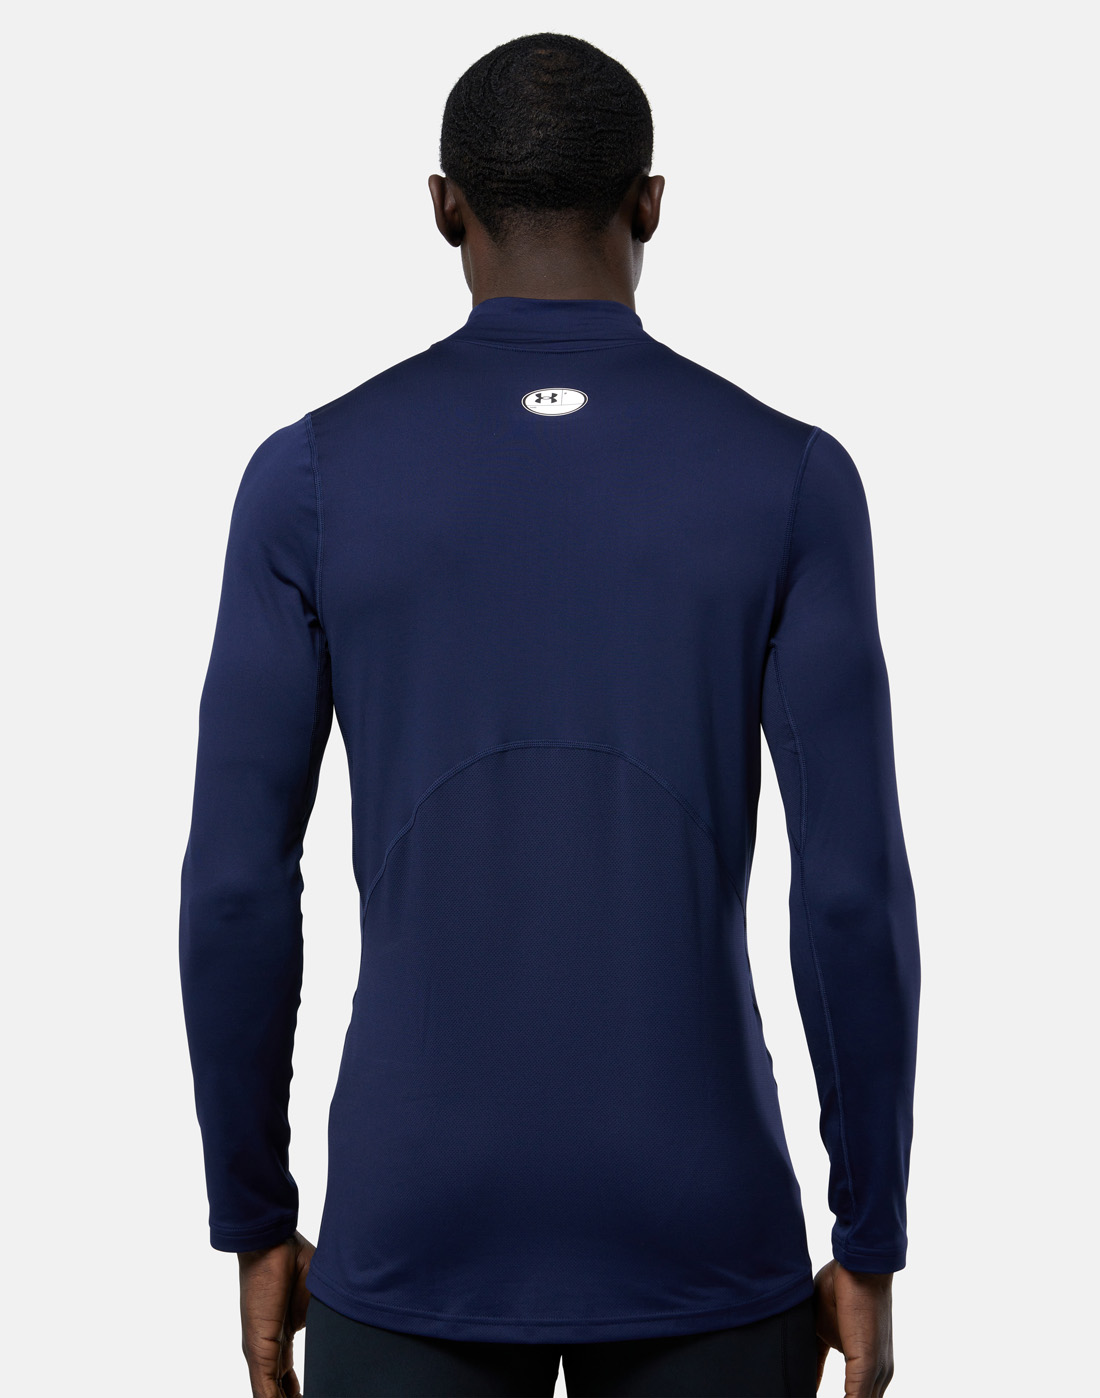 Under Armour ColdGear Armour Fitted Mock Base Layer Navy